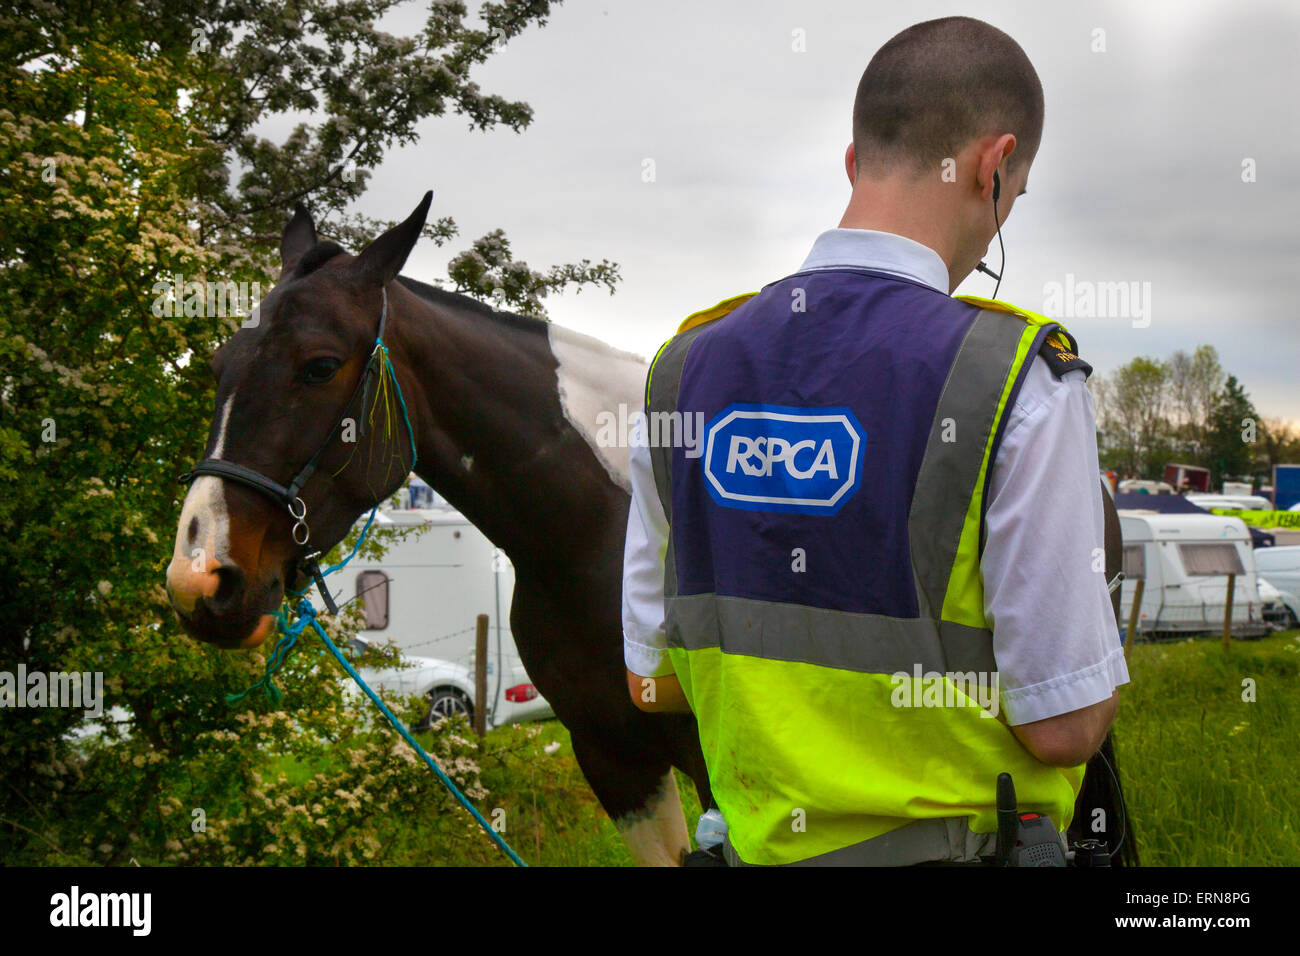 RSPC officer at the Appleby Horse Fair in Cumbria.  The Fair is an annual gathering of Gypsies and Travellers which takes place on the first week in June, and has taken place since the reign of James II, who granted a Royal charter in 1685 allowing a horse fair 'near to the River Eden', and is the largest gathering of its kind in Europe. Appleby, Cumbria, Uk. 5th June, 2015. Stock Photo